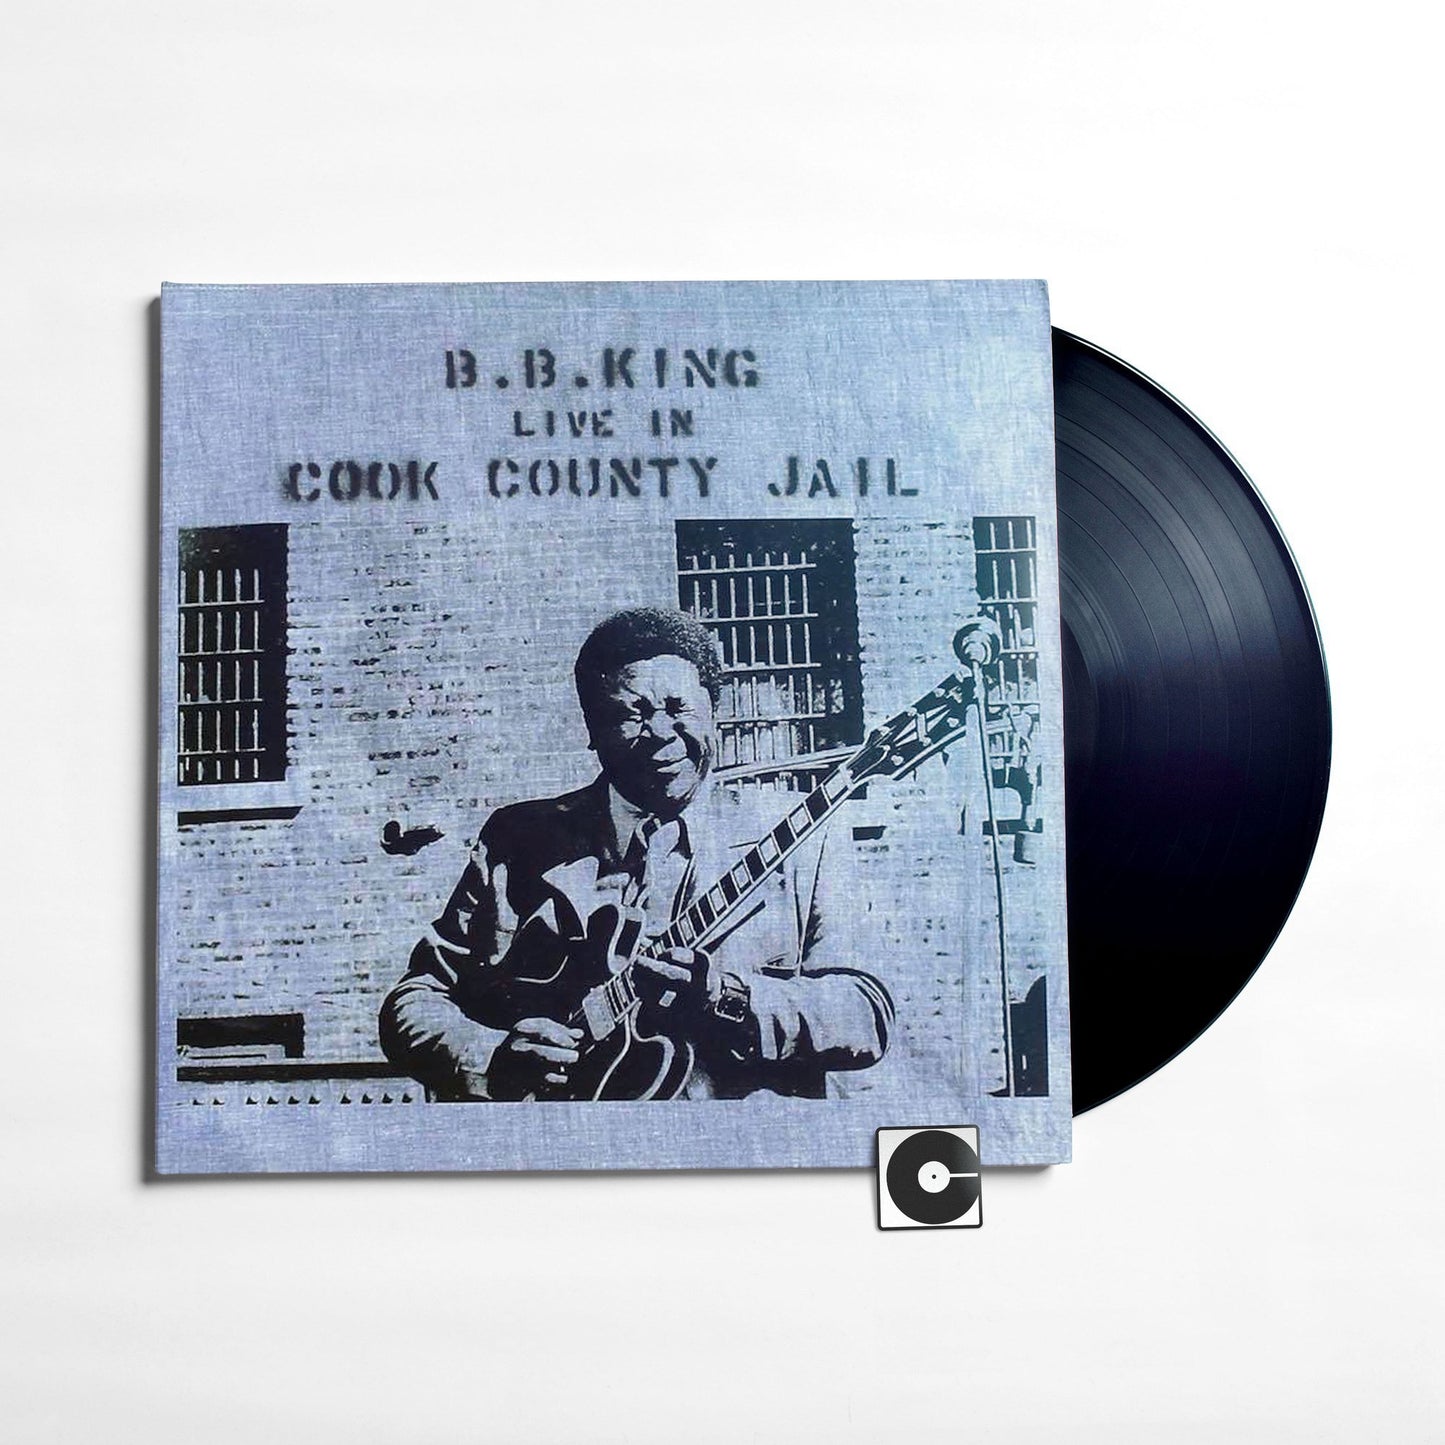 B.B. King - "Live In Cook County Jail"